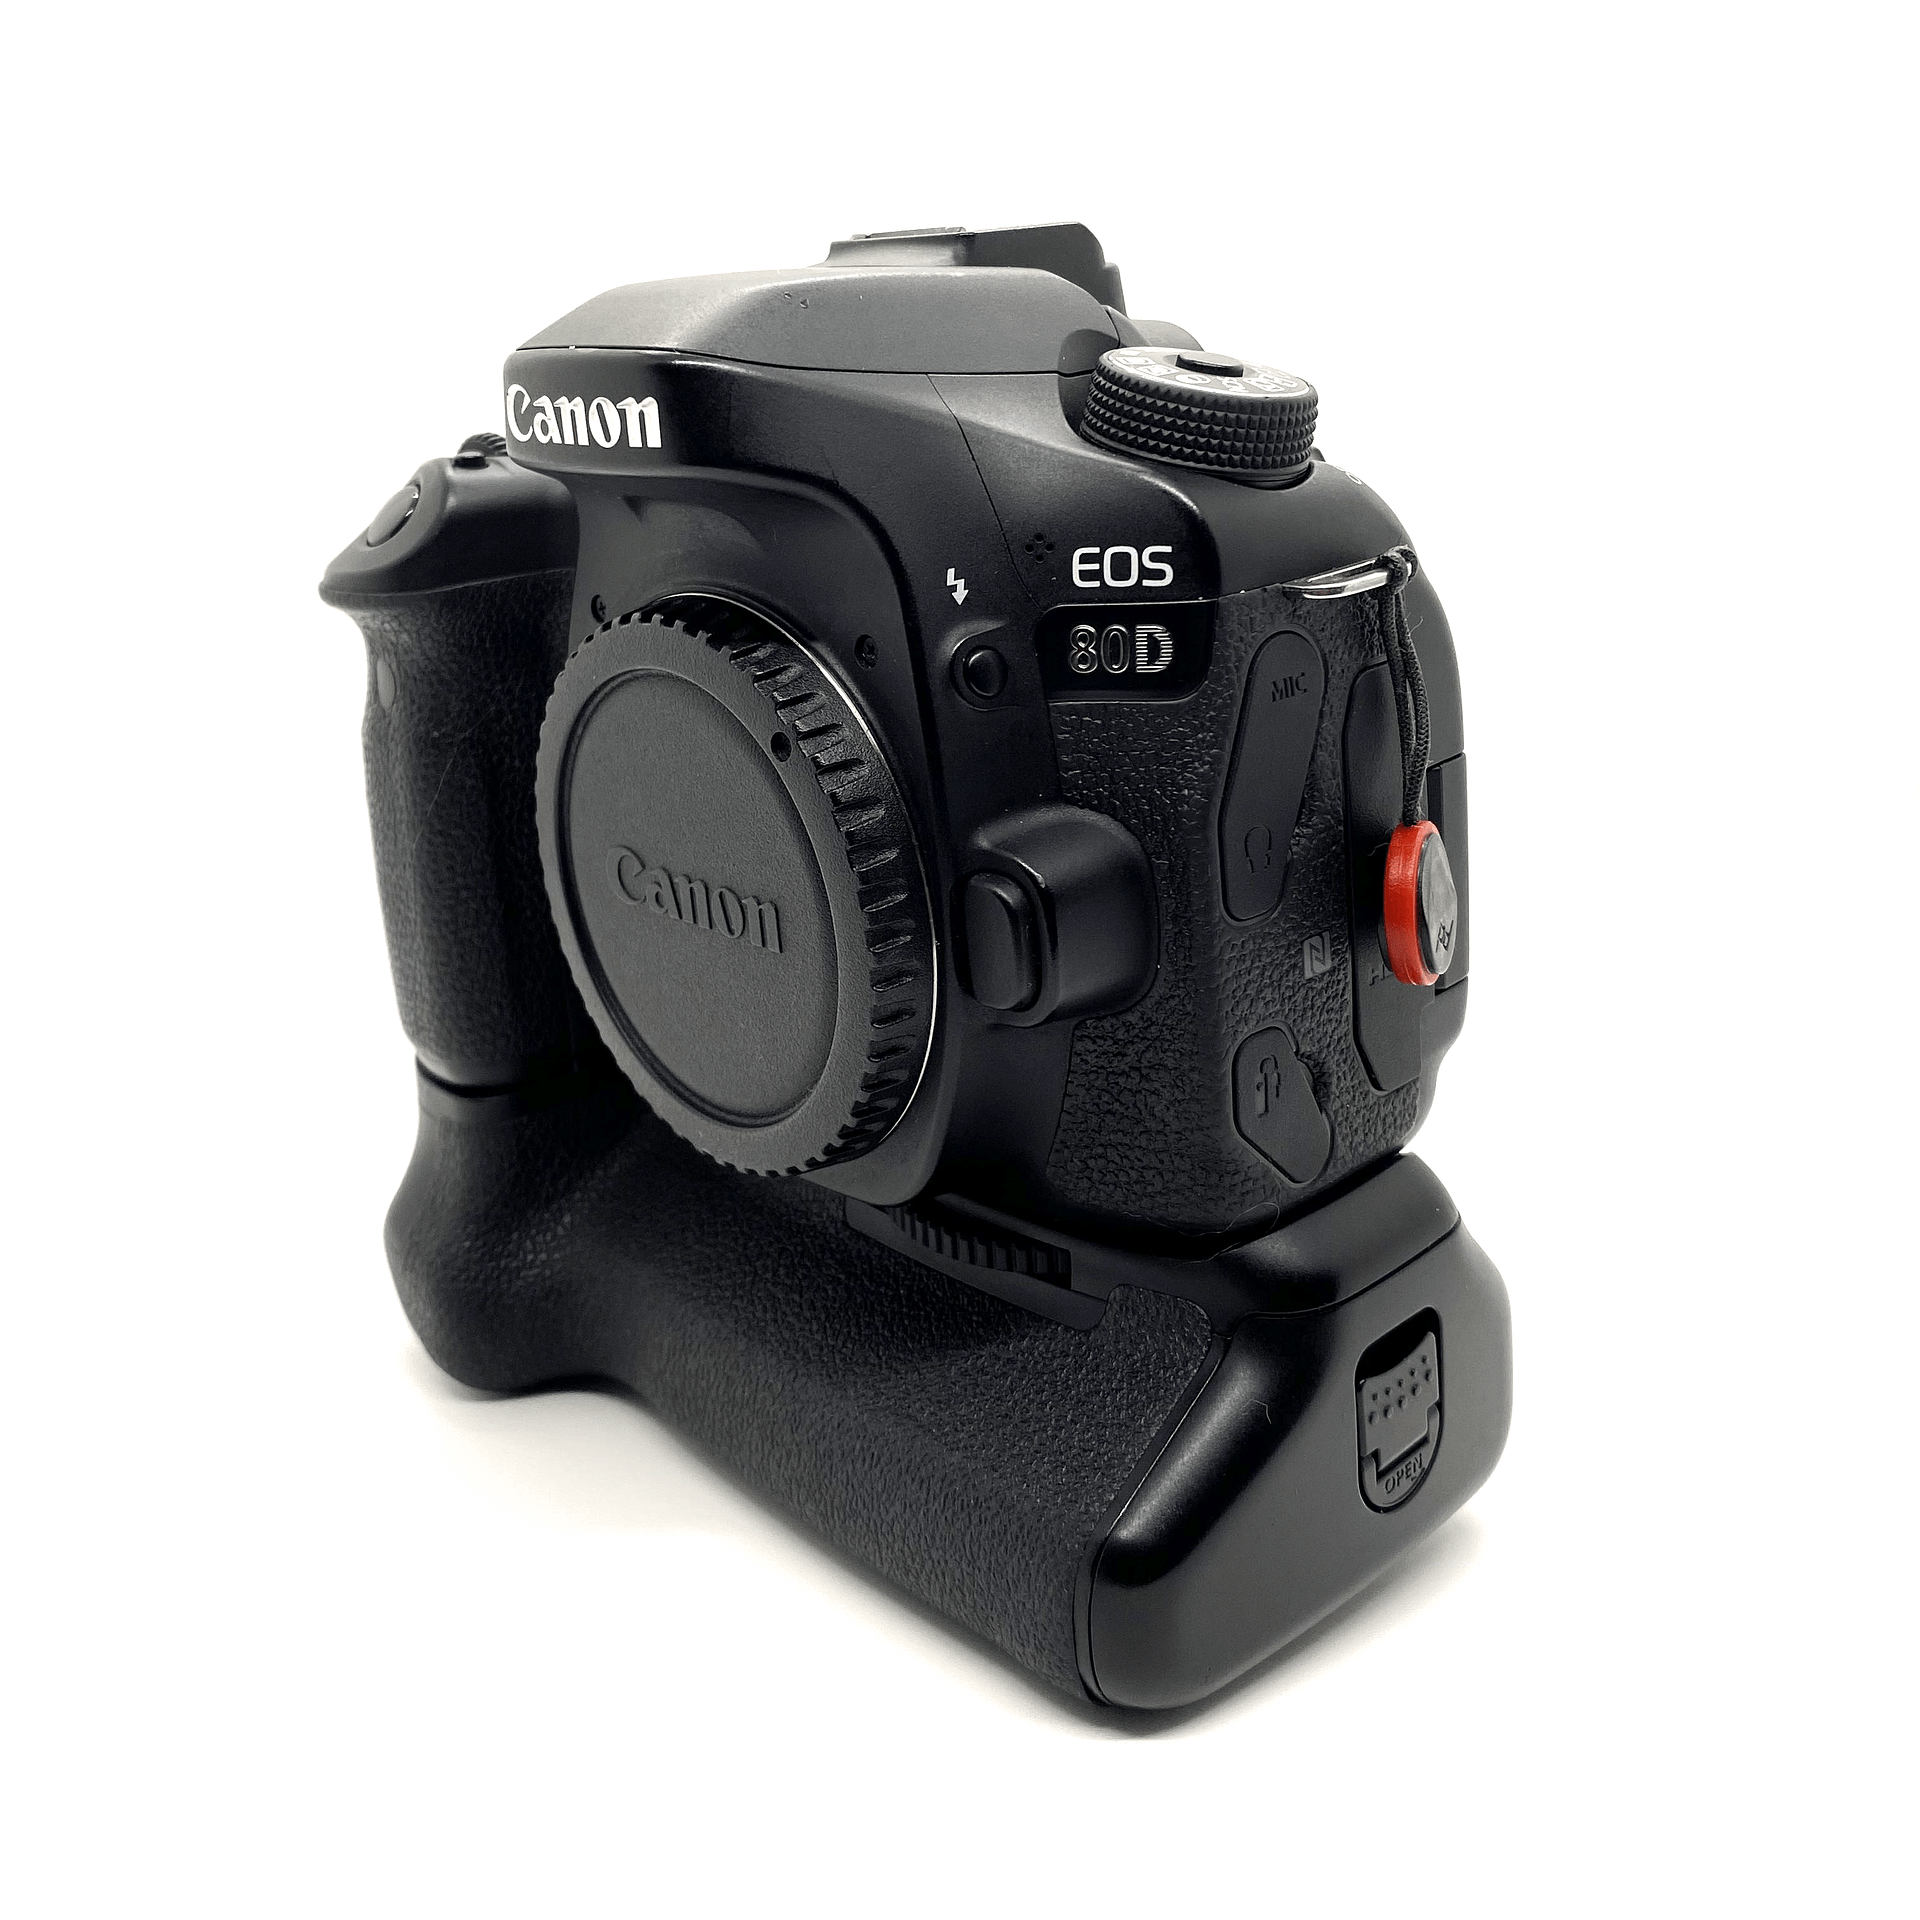 Showing angle 1 of the Canon 80D for review